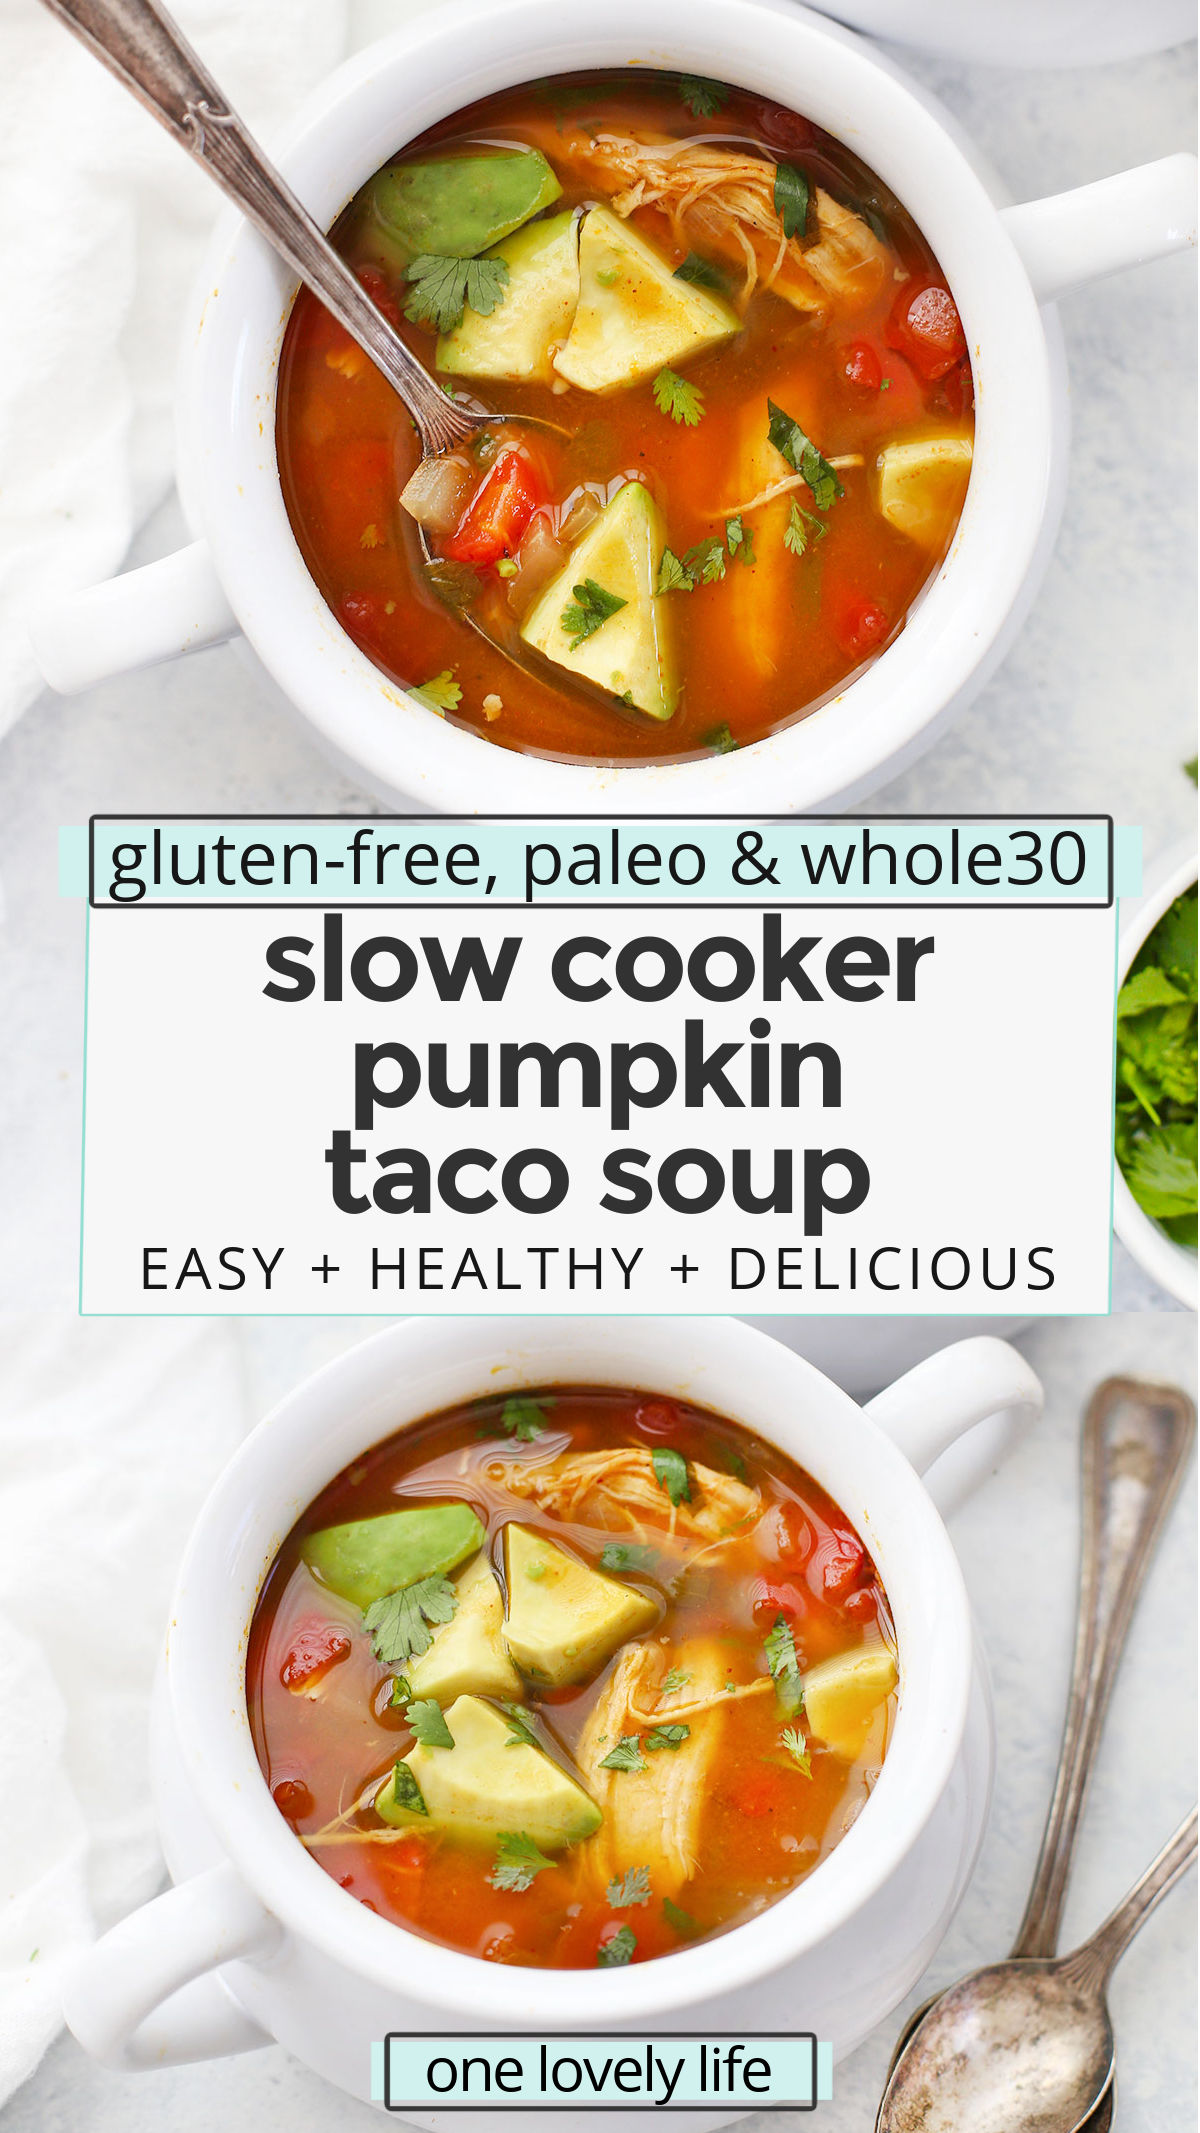 Slow Cooker Pumpkin Taco Soup - This easy paleo slow cooker recipe makes the BEST taco soup. We make it year round! (Gluten Free, Paleo & Whole30) // Slow Cooker Taco Soup // Instant Pot Taco Soup // Whole30 Slow Cooker // Crockpot Soup // Taco Soup Recipe #paleo #glutenfree #whole30 #slowcooker #crockpot #tacosoup #pumpkin